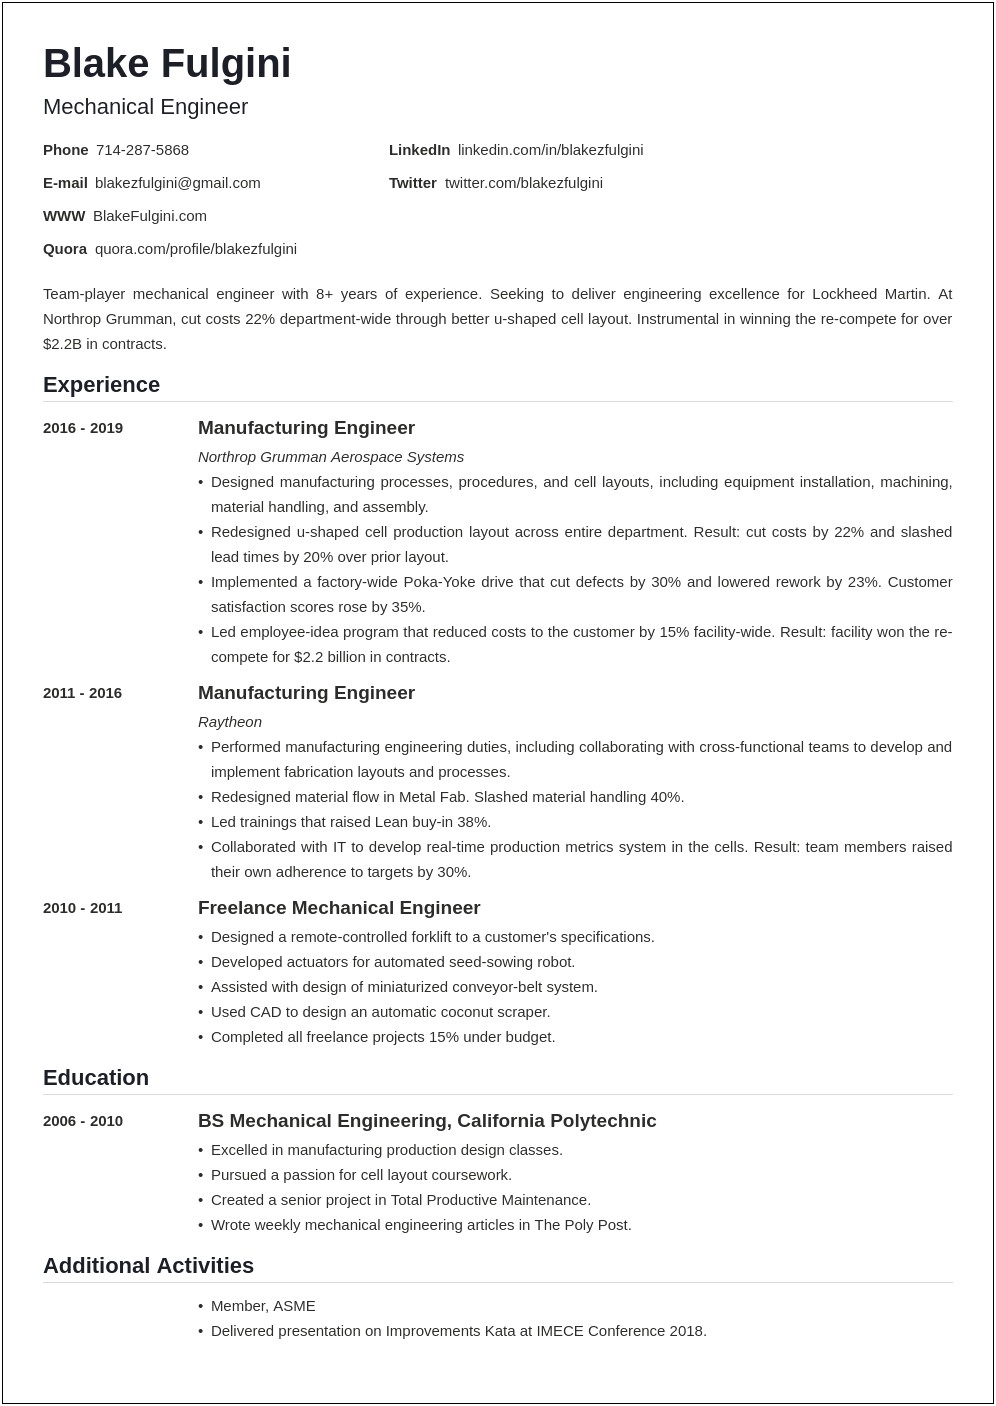 Sample Resume For Mechanical Design Engineer With Experience